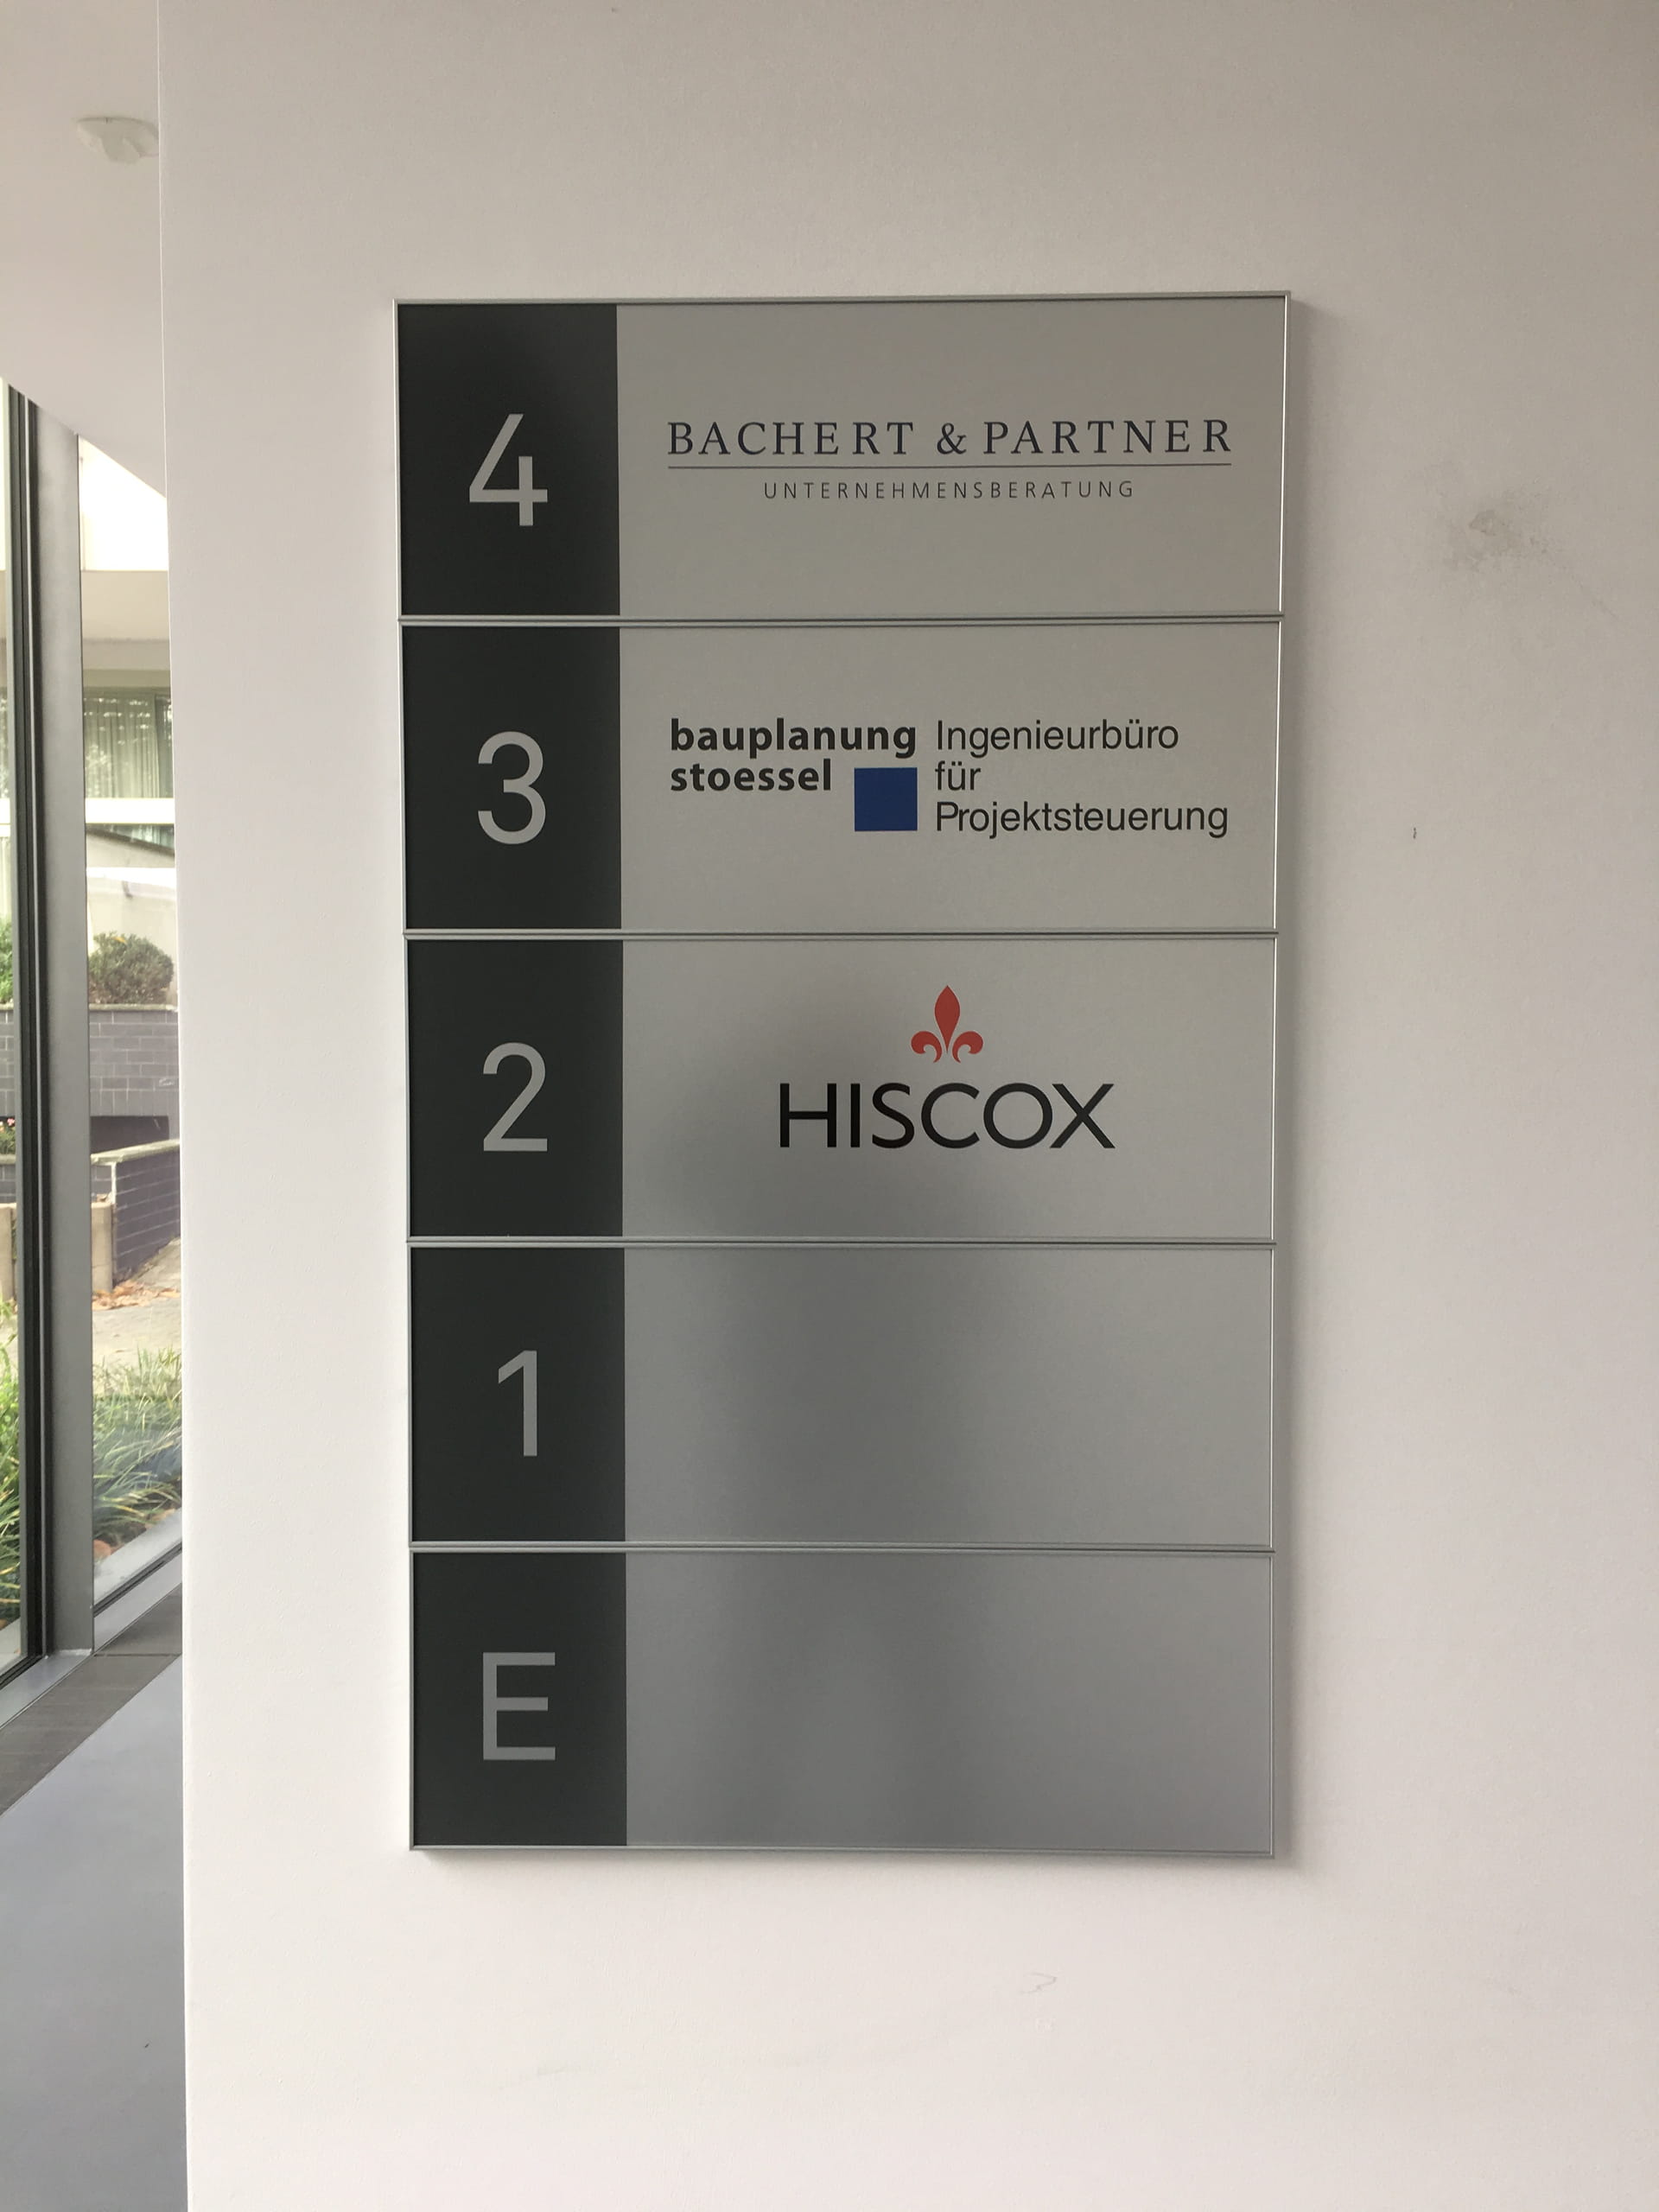 Elegant sign system for the interior signage of buildings by anplakt